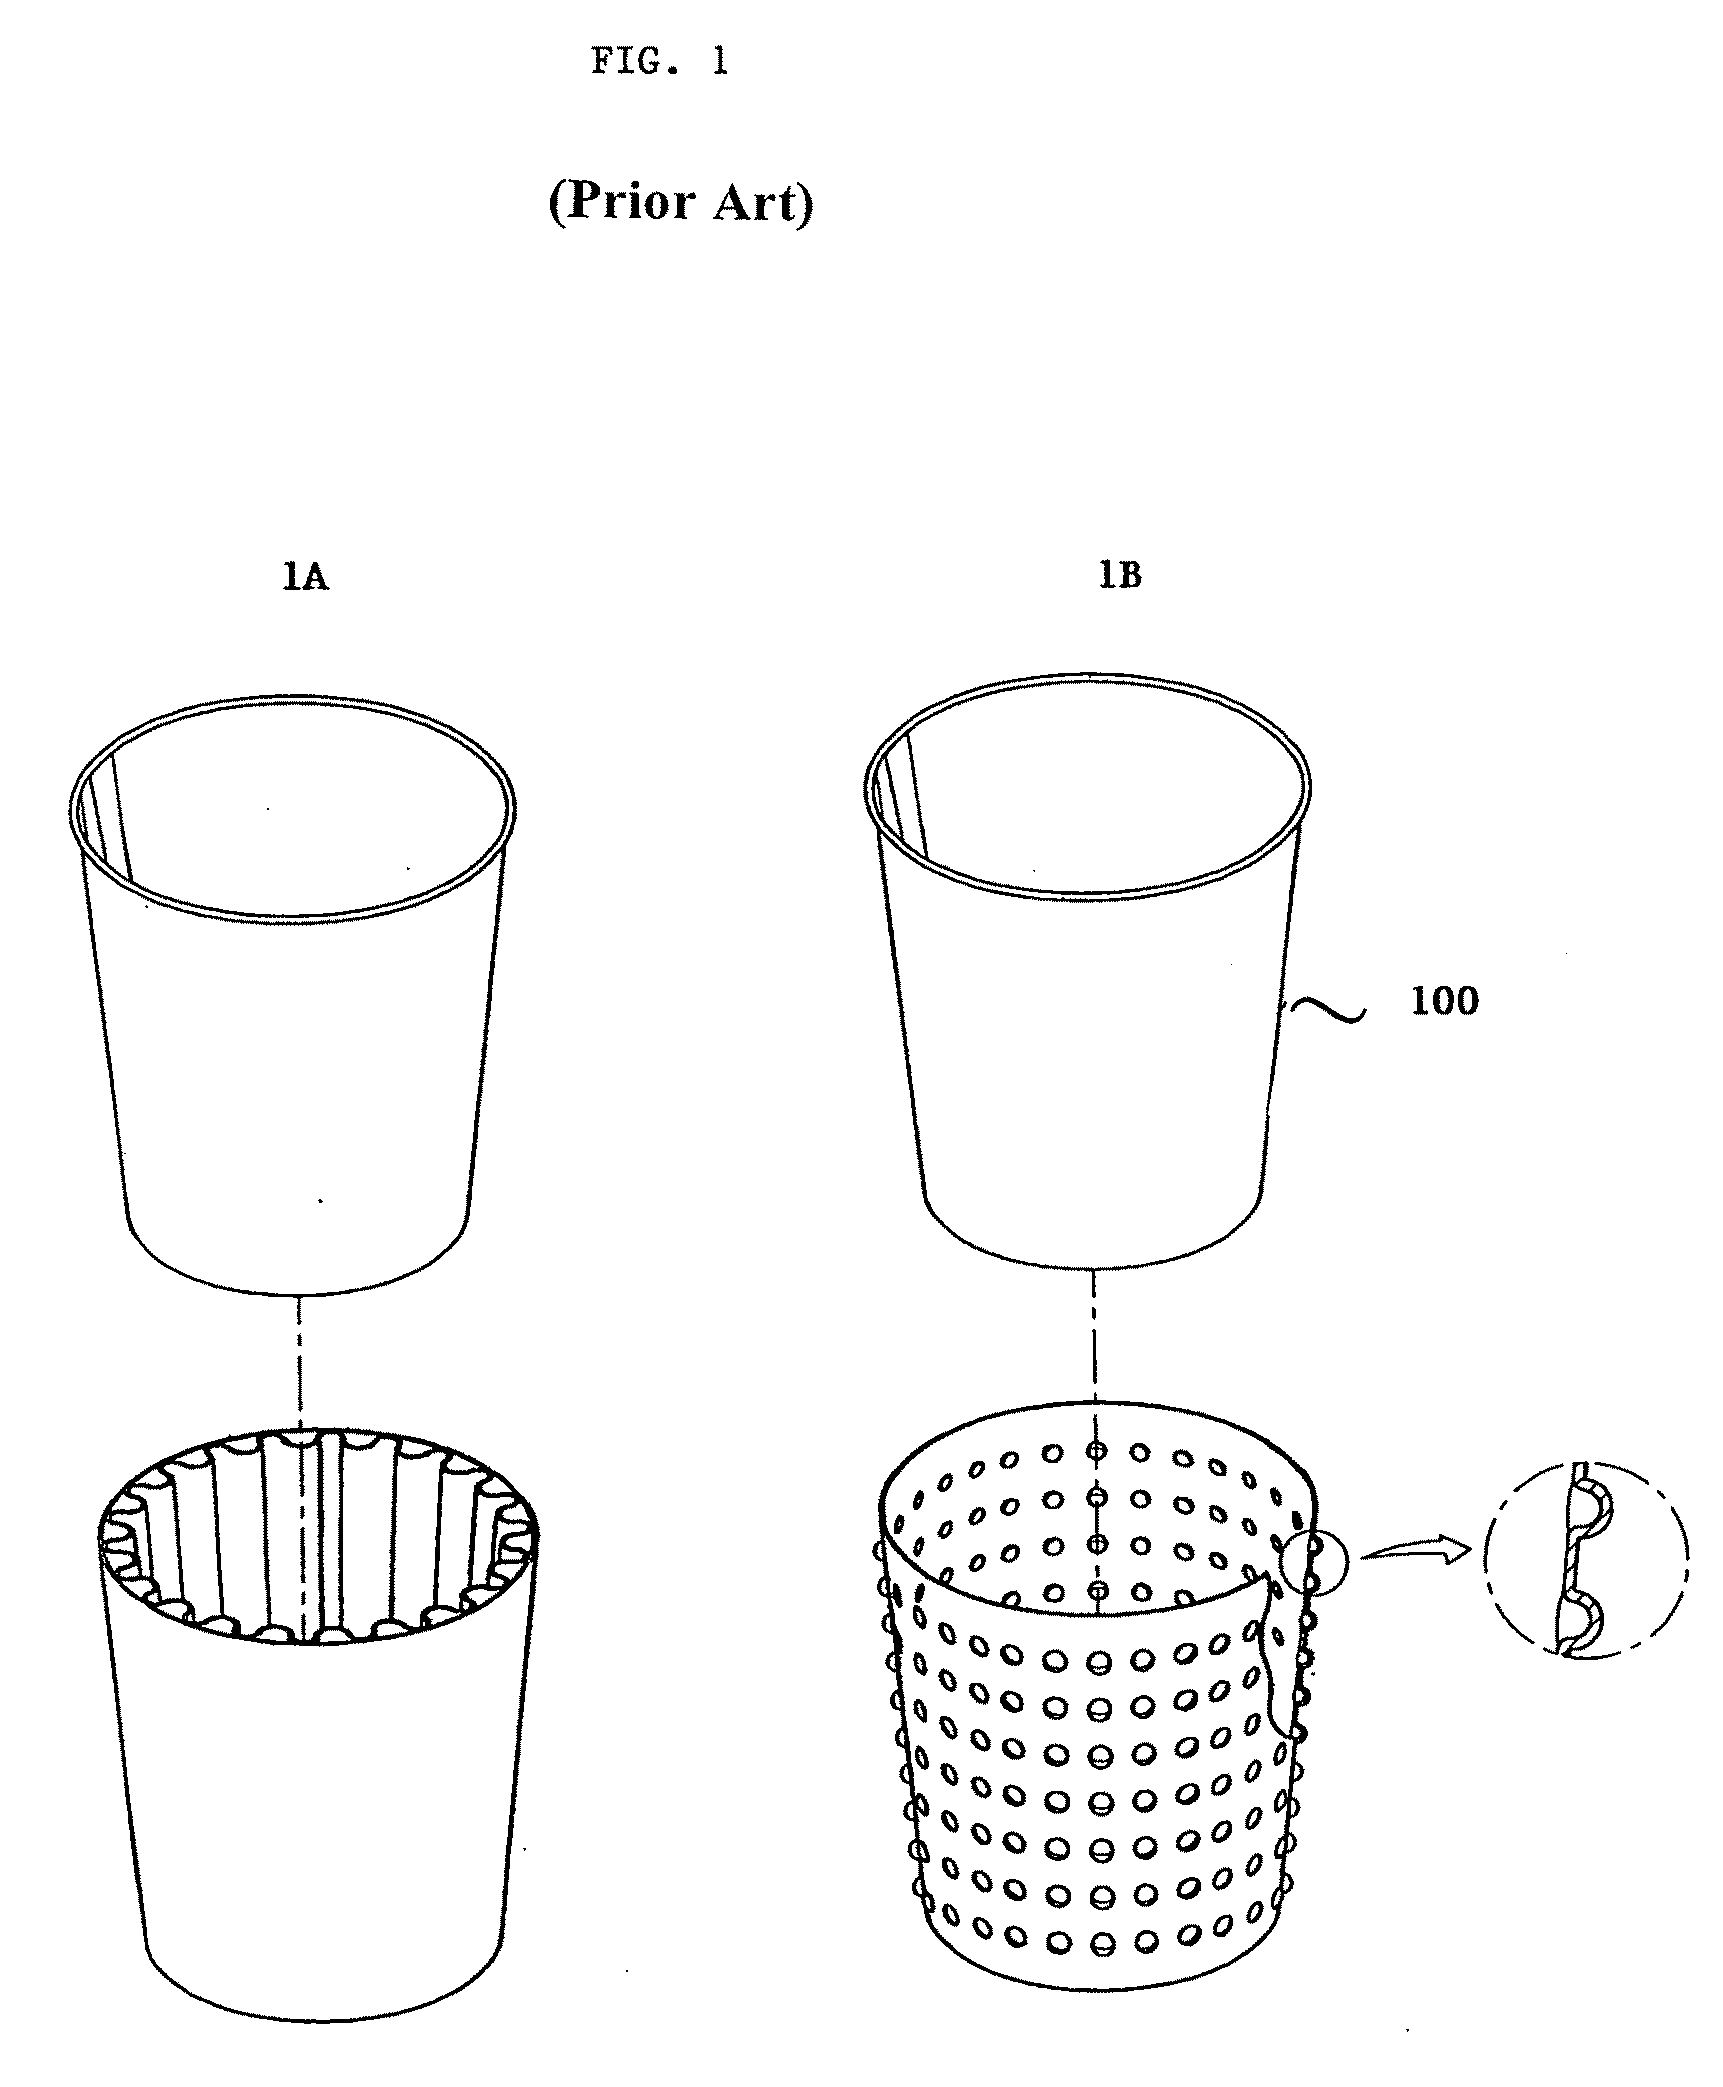 Holder for disposable paper container